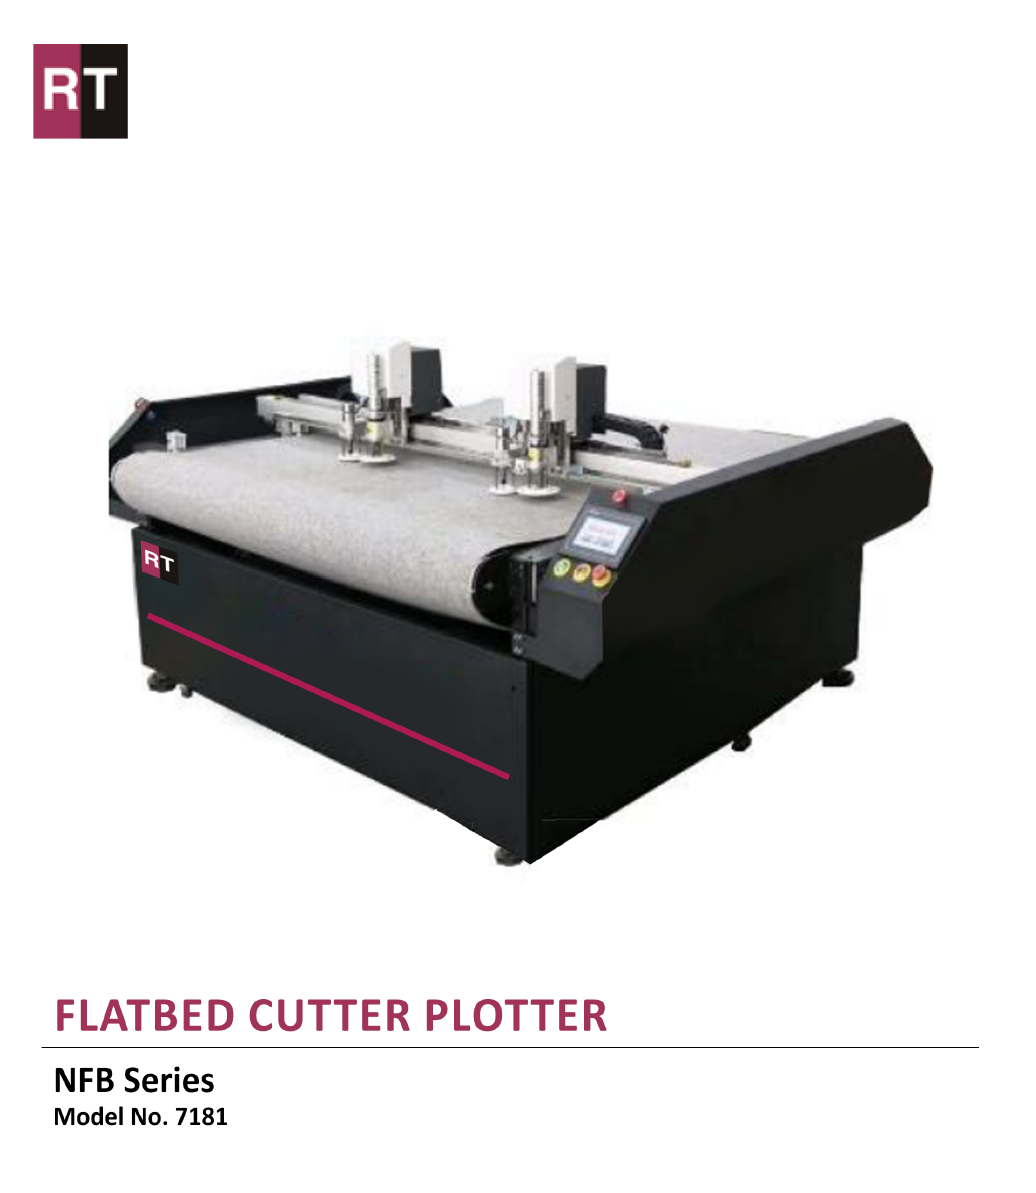 REACH Flatbed Cutter Plotter Image 4